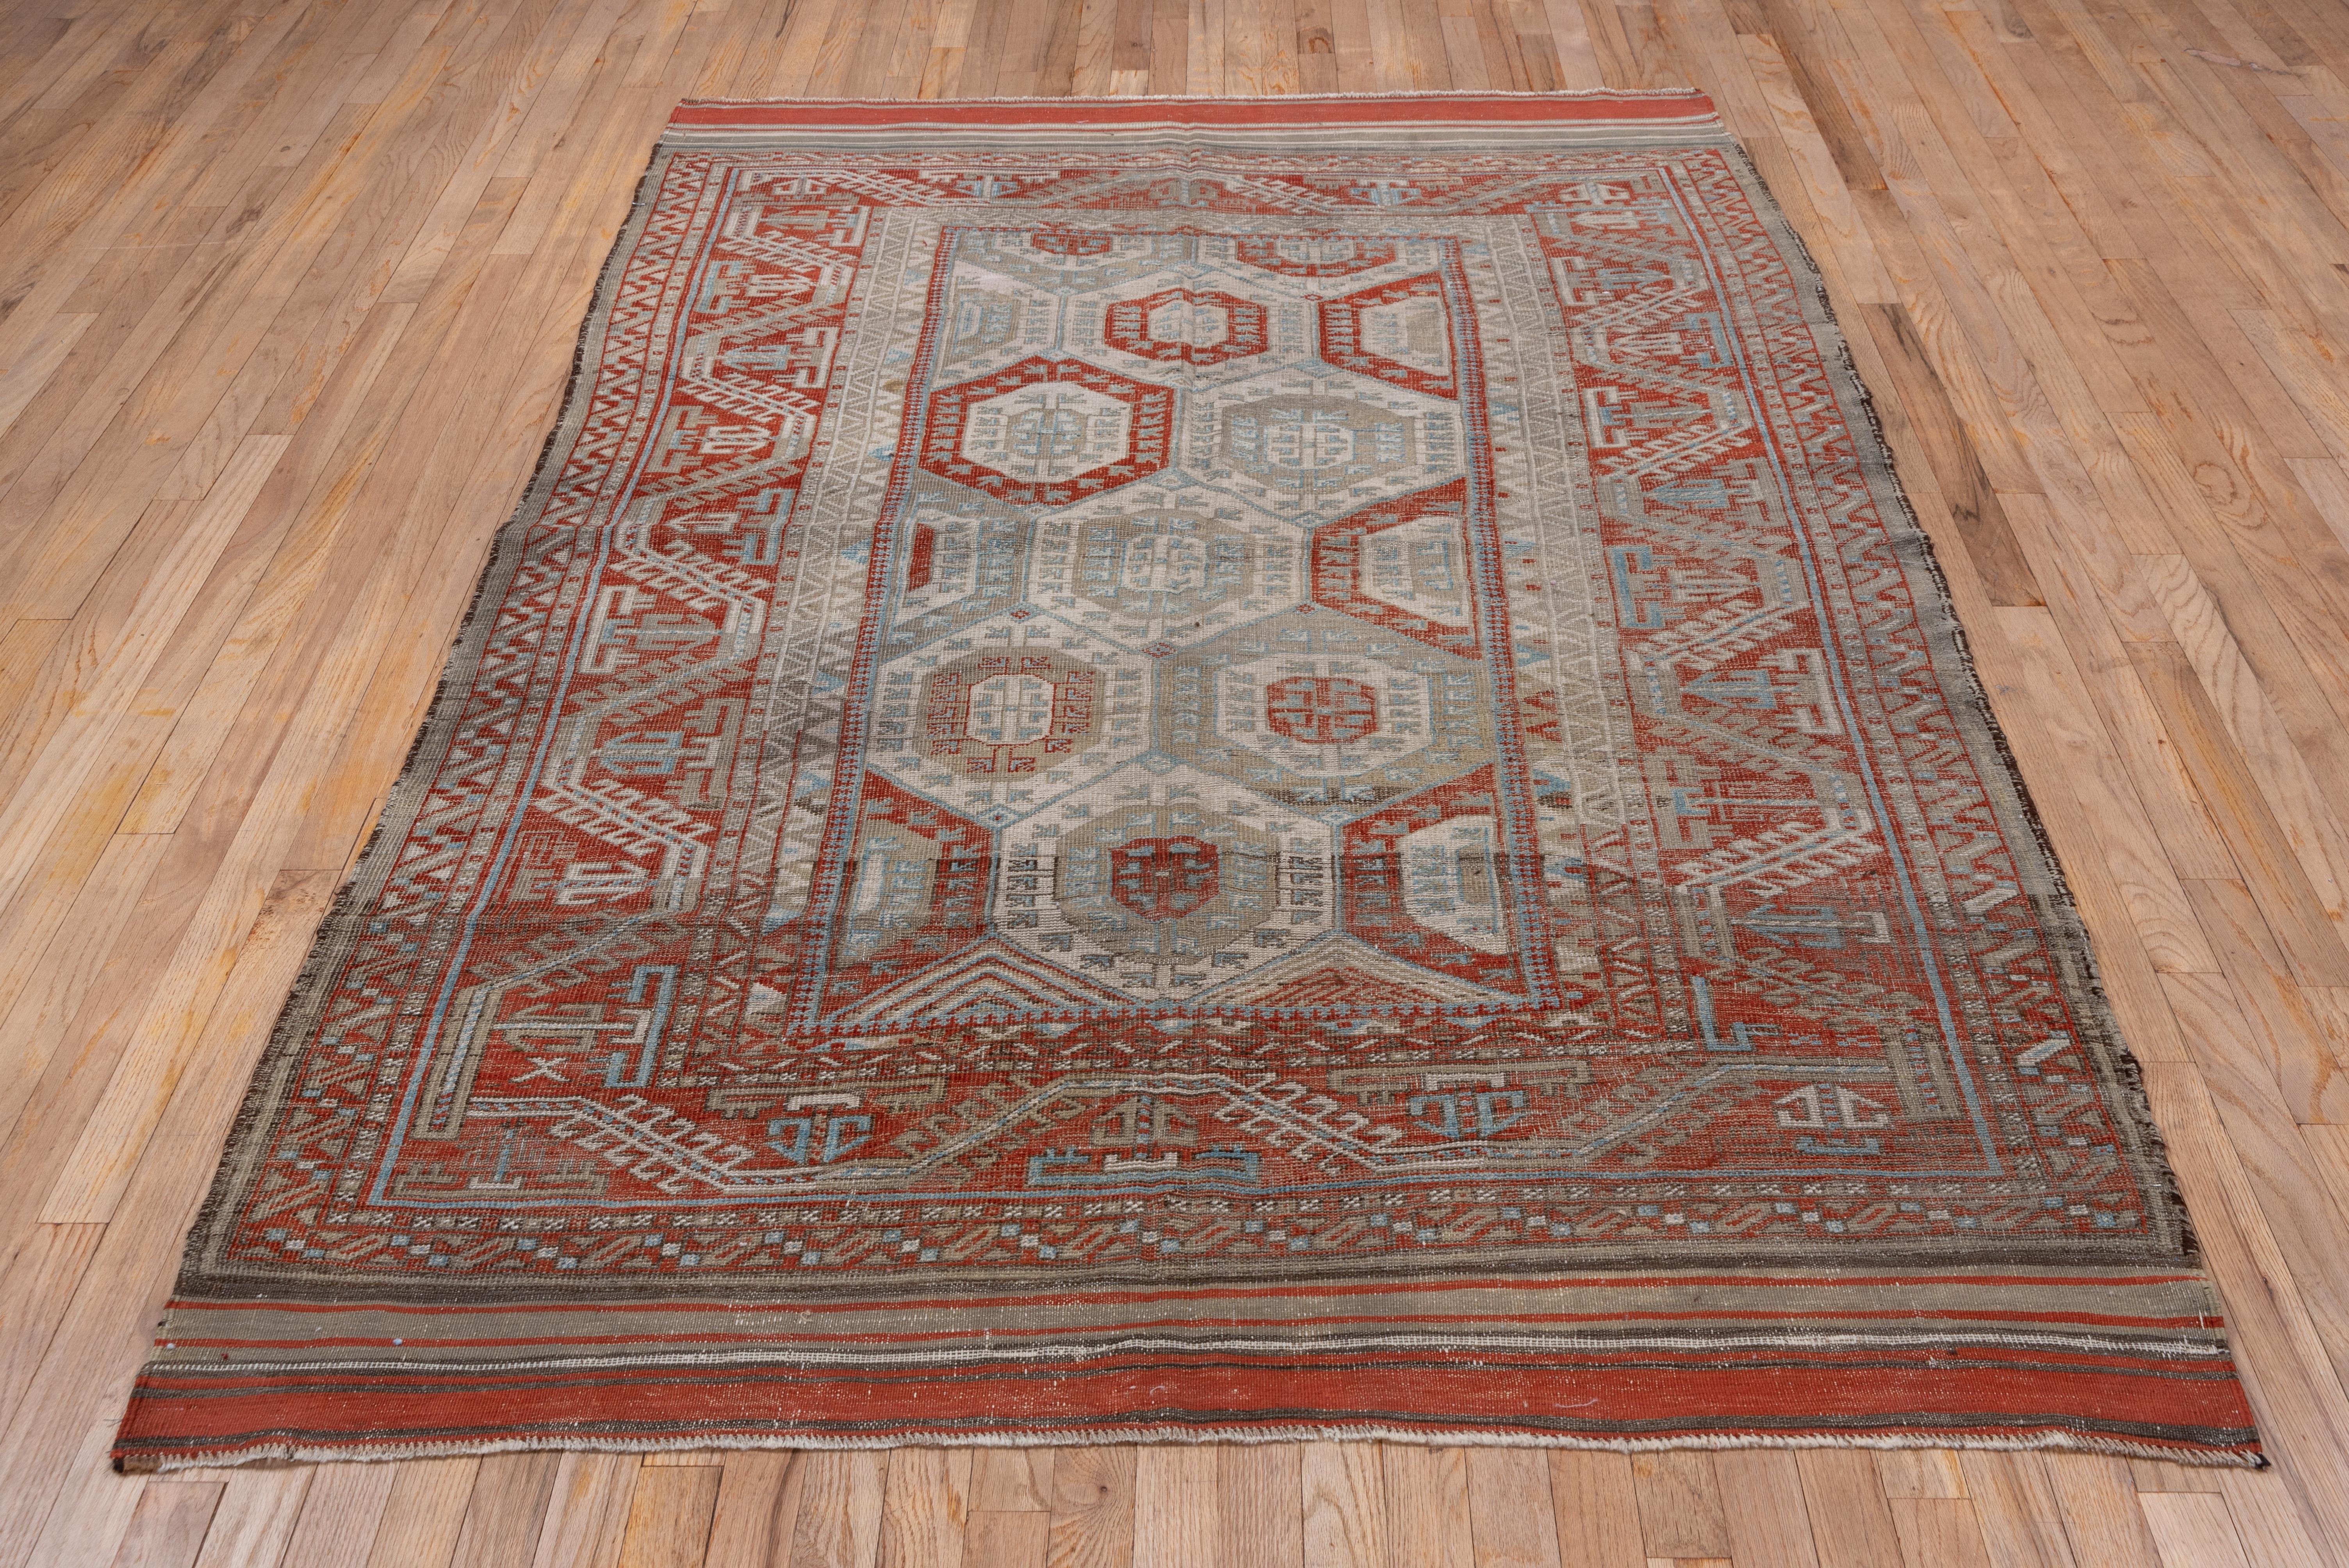 A Turkmen-style faceted undulating hooked vine and palmette border closely frames a repeating pattern of layered hexagons enclosing and sprouting small flowers, accented in shades of red, mauve and graphite. This east Persian/West Afghanistan large